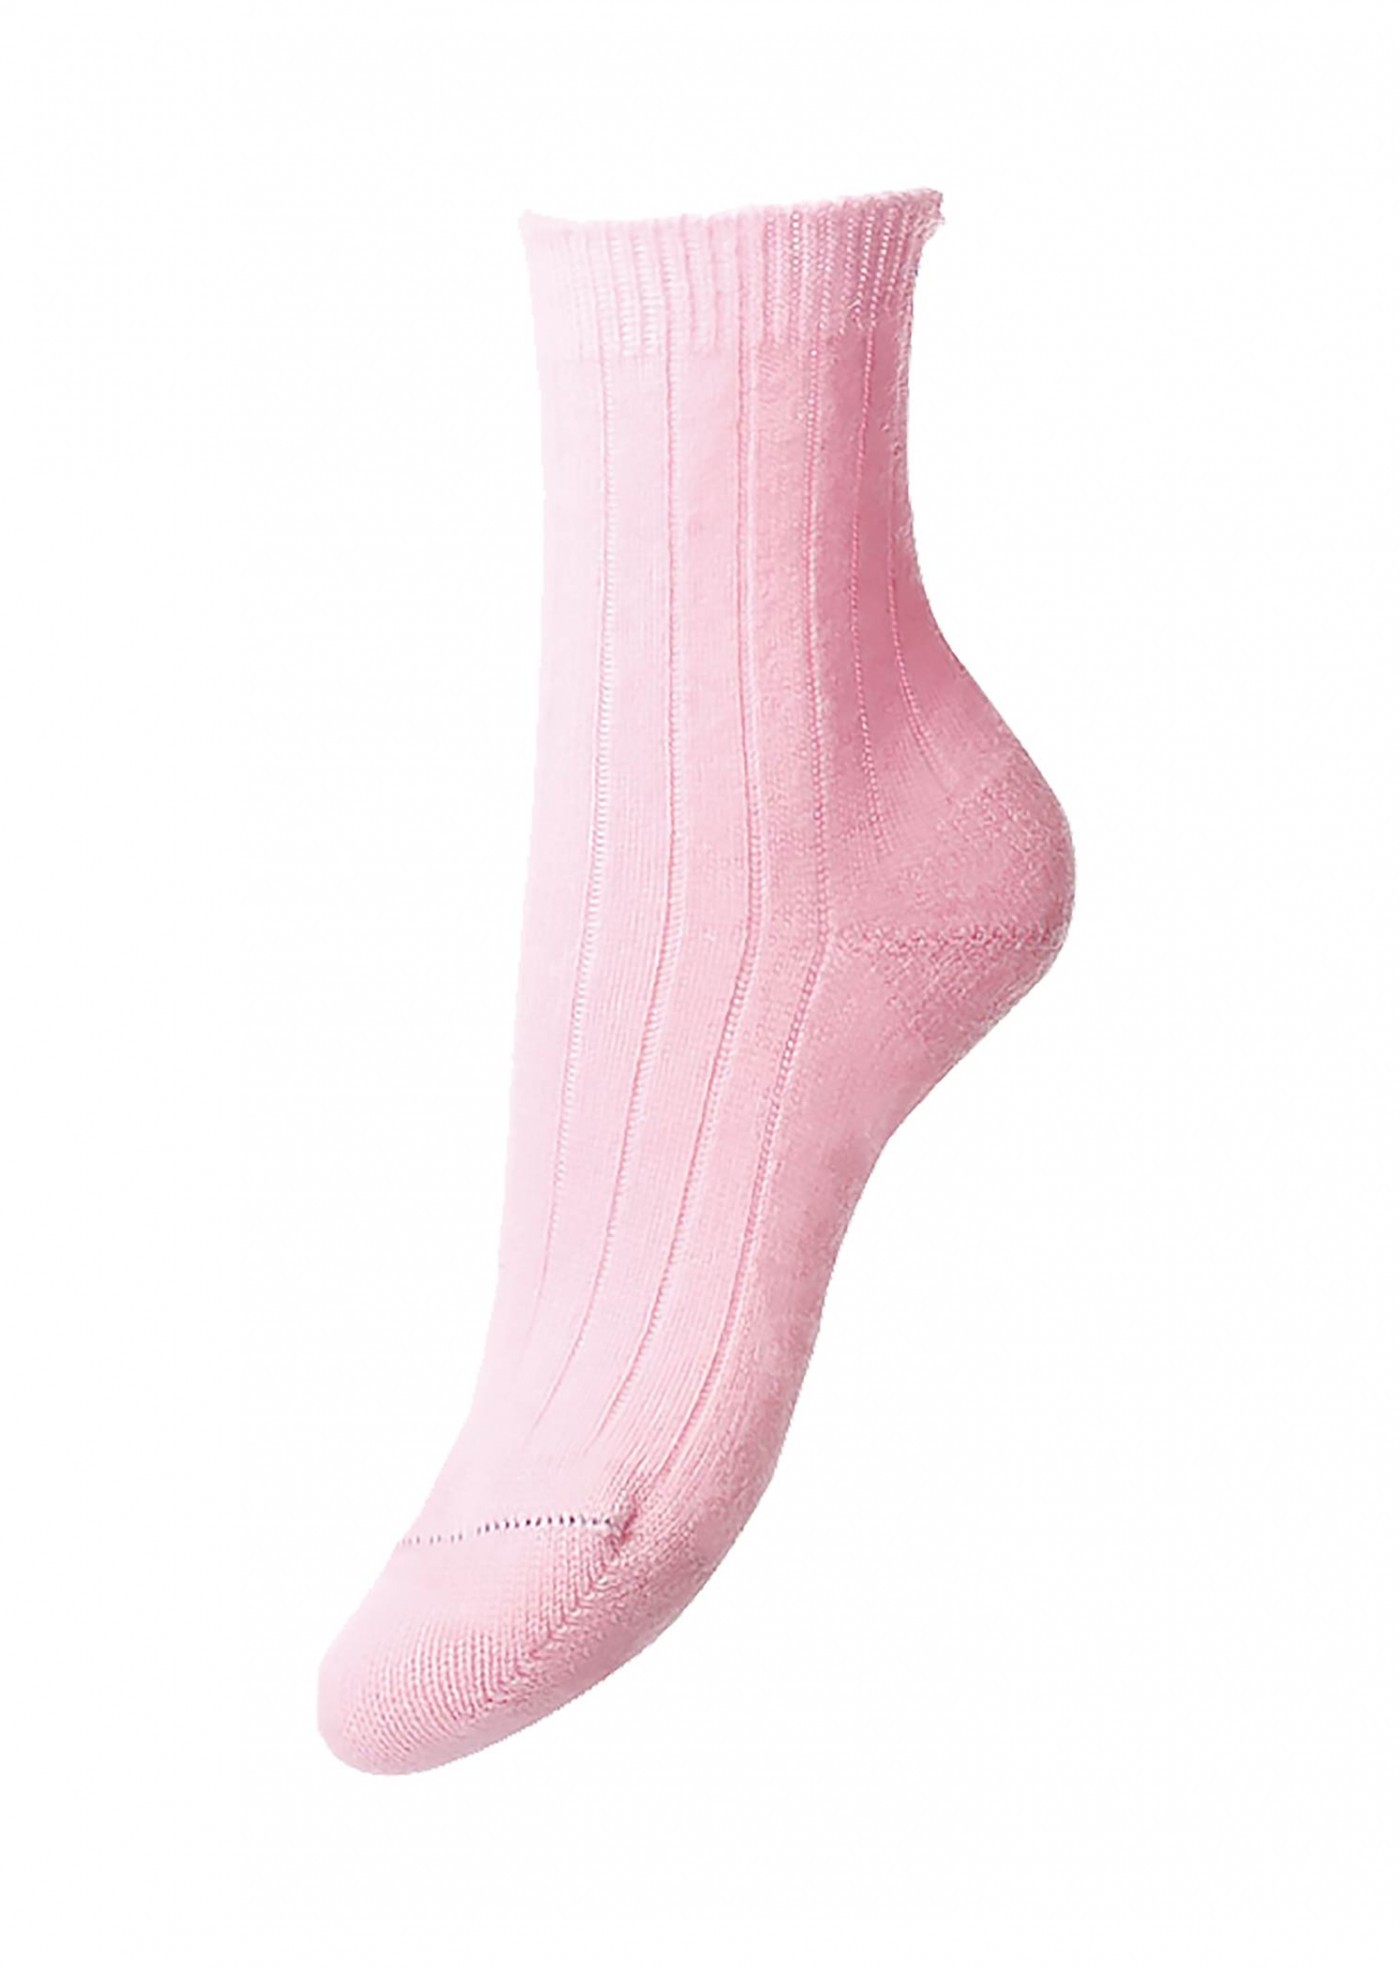 Pantherella Women's Tabitha Cashmere Ribbed Anklet Socks in Pale Pink